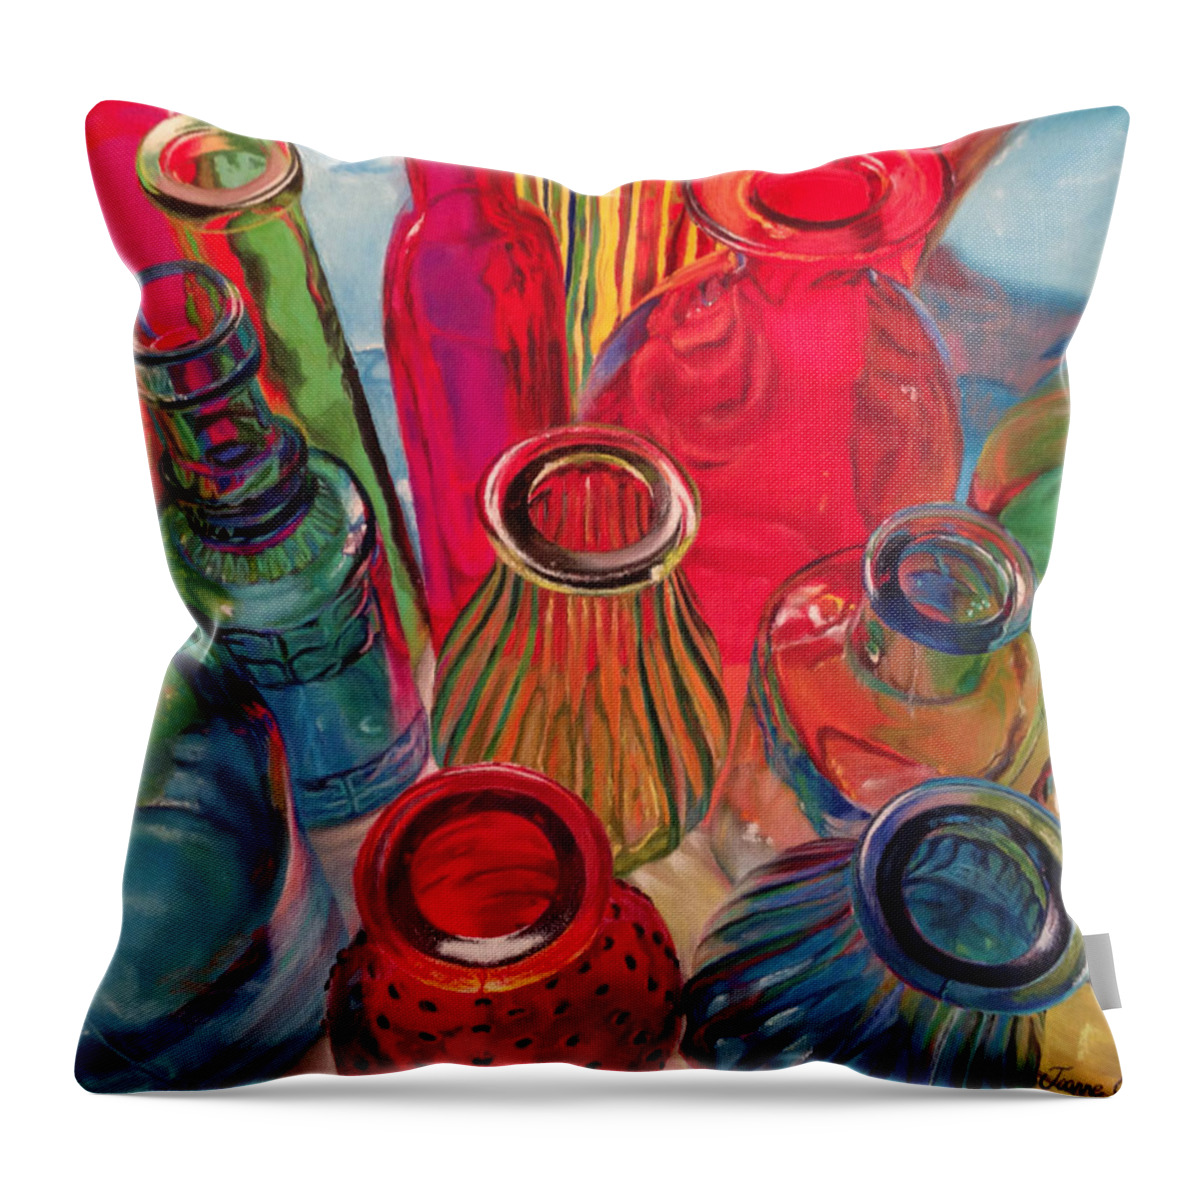 Colored Bottles Throw Pillow featuring the painting Bottle Tops by Joanne Grant